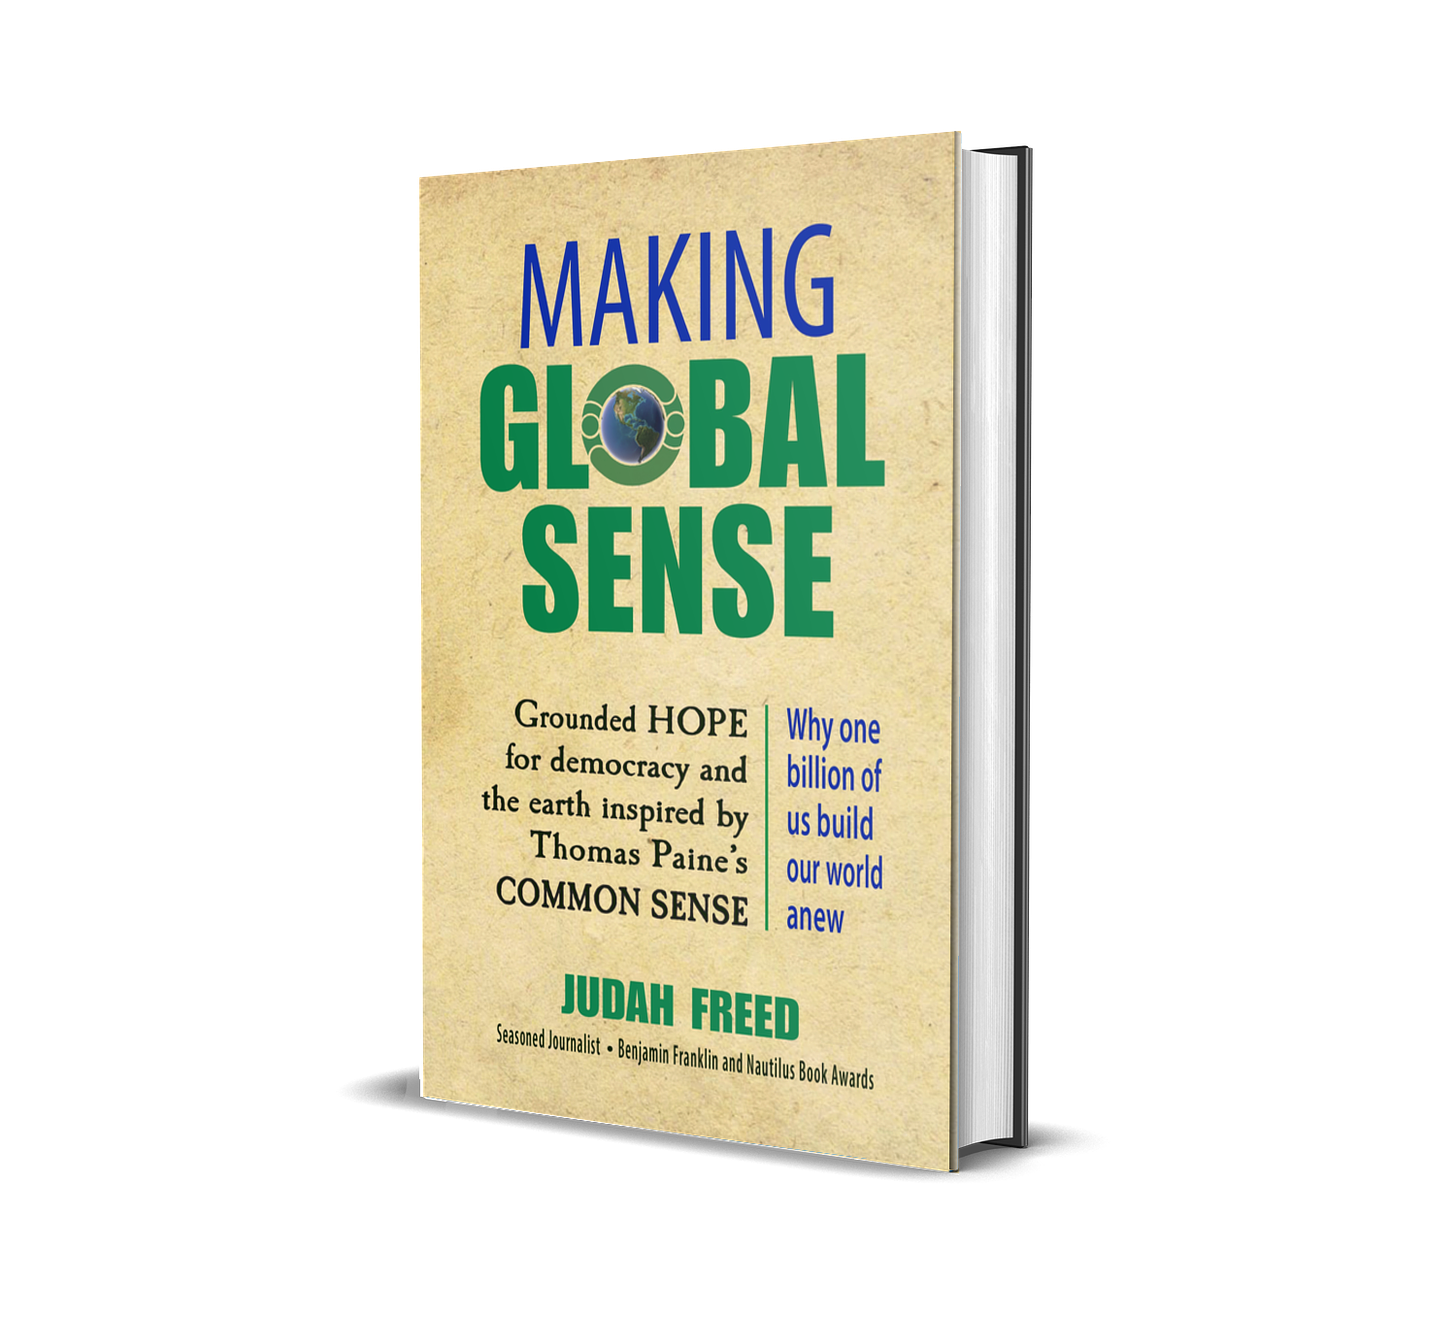 Making Global Sense: Grounded hope for democracy and the earth inspired by Thomas Paine's Common Sense. 